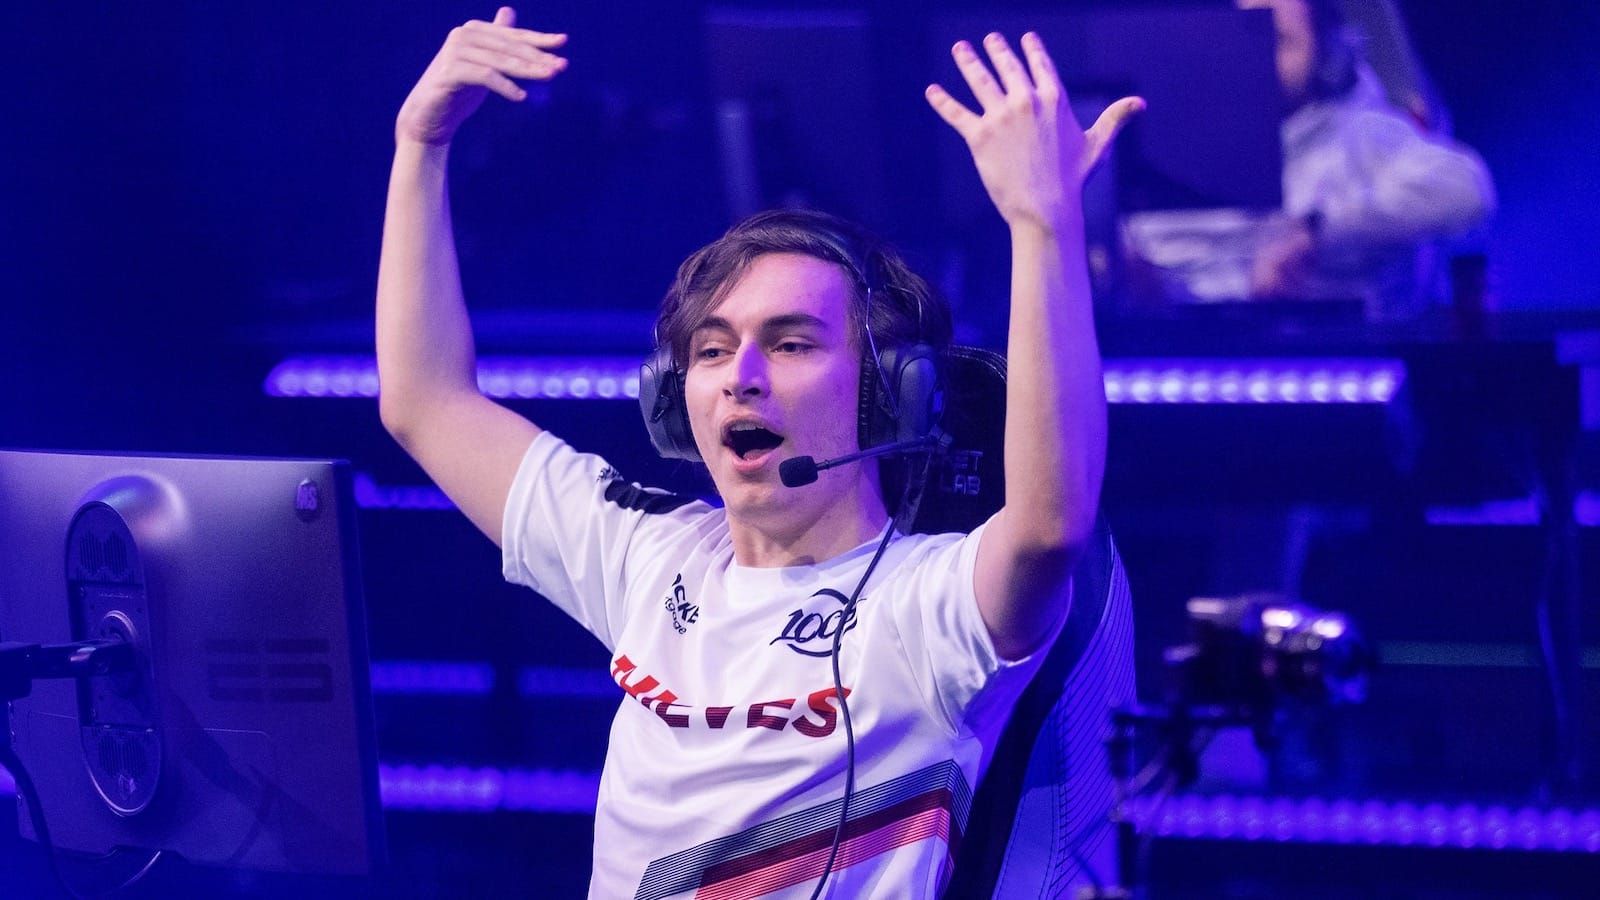 100 Thieves Valorant player Asuna sits on a chair onstage and raises his arms up in joy